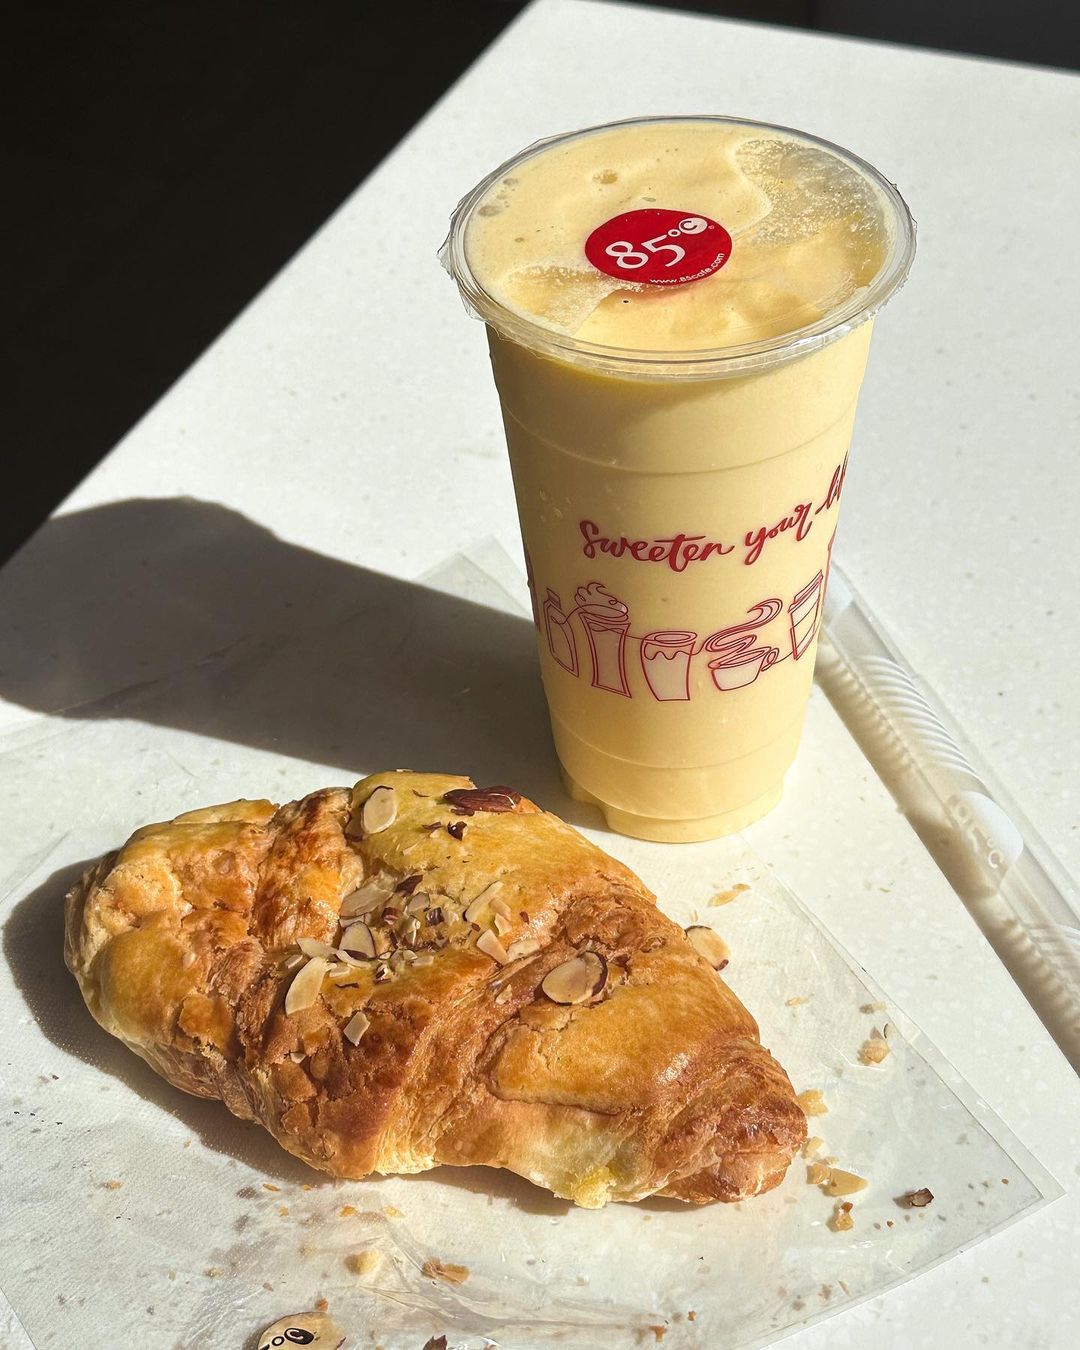 Smoothie and croissant at 85C Bakery Cafe